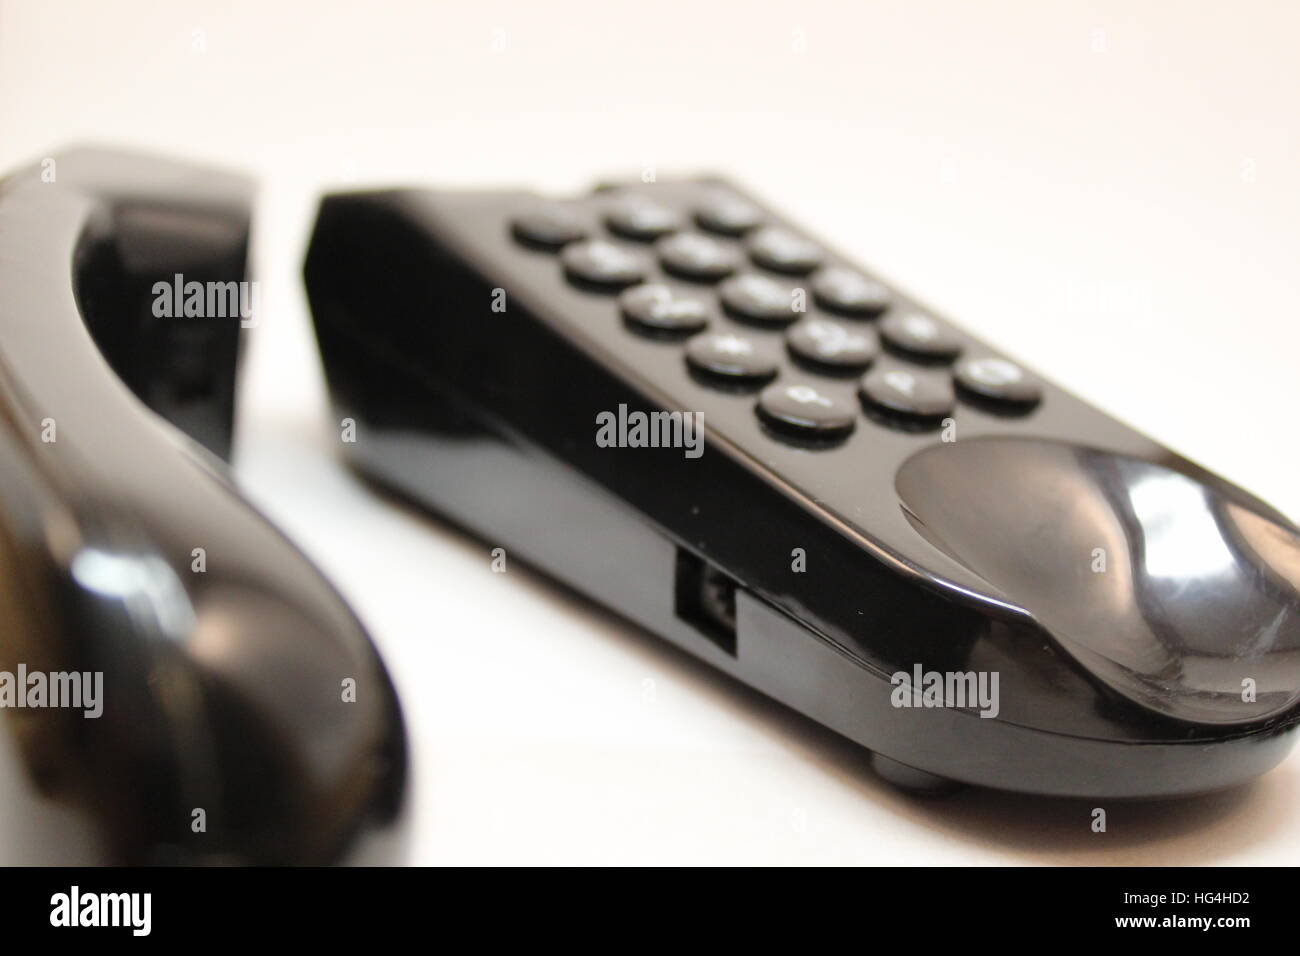 A black telephone on a white background Stock Photo